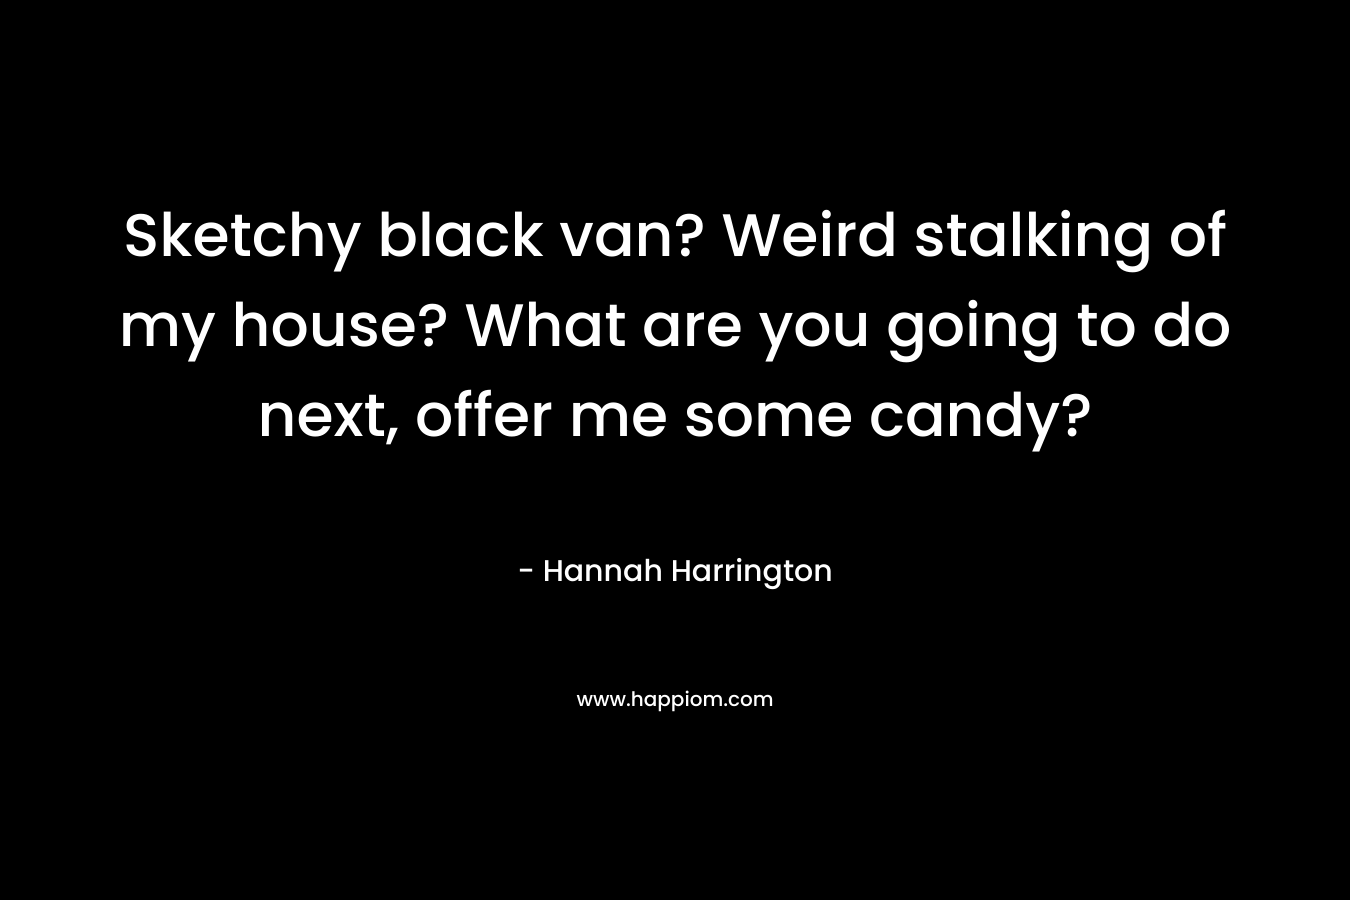 Sketchy black van? Weird stalking of my house? What are you going to do next, offer me some candy?